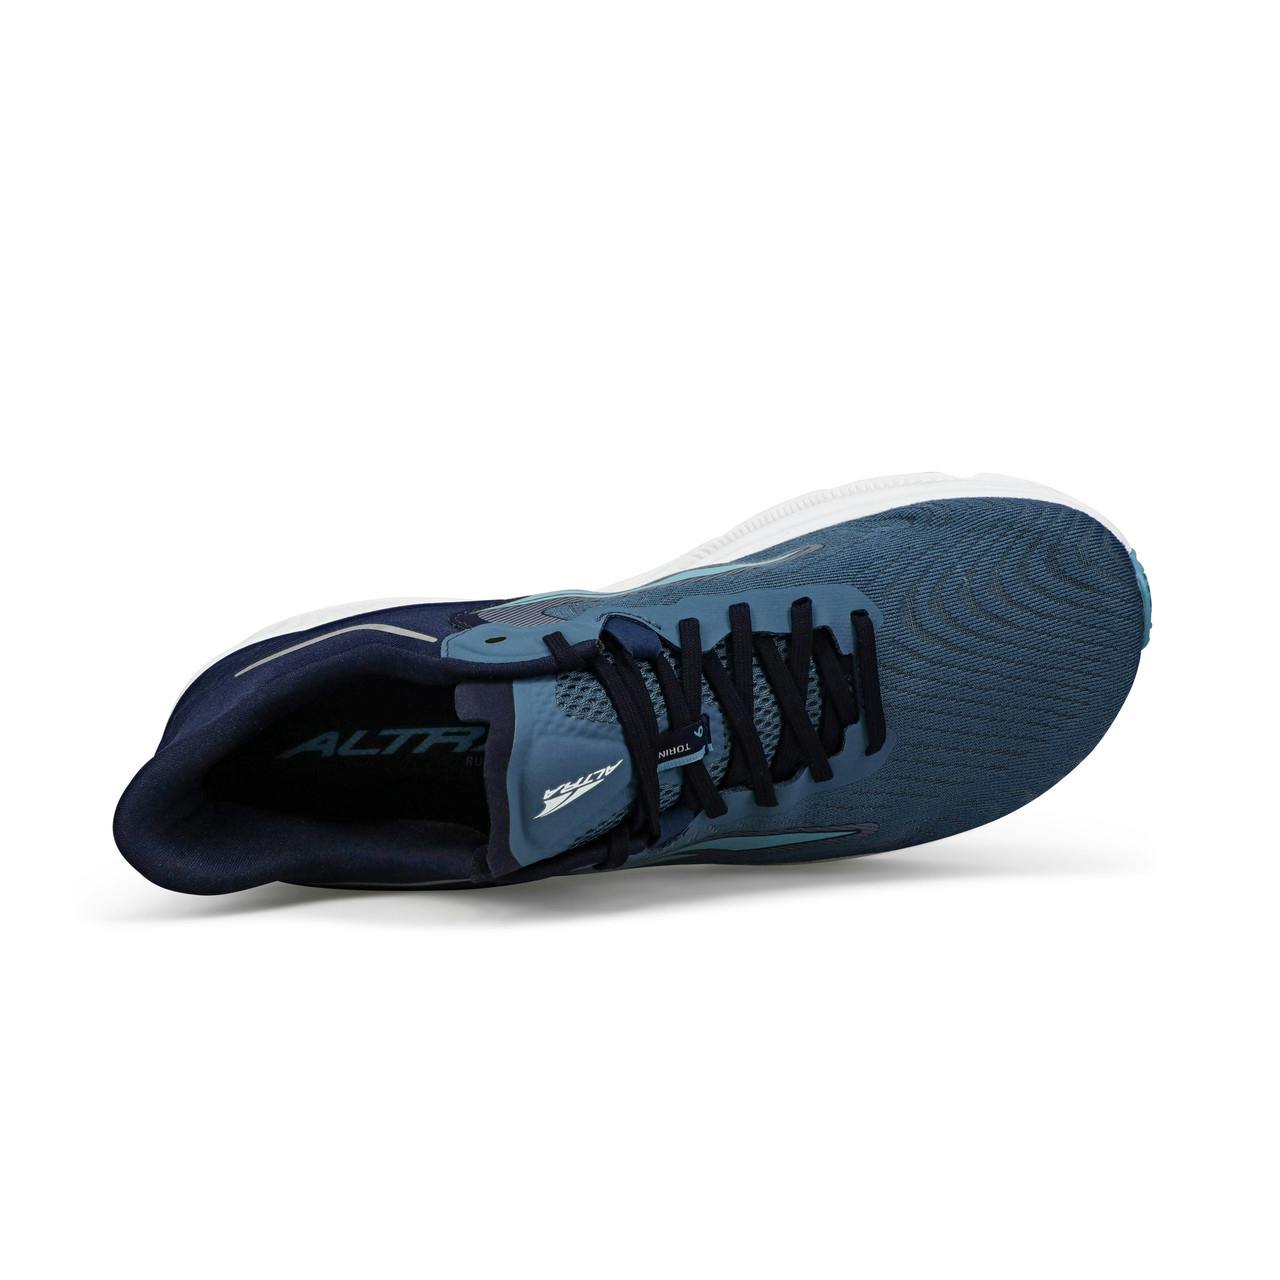 Torin 6 Road Running Shoes Mineral Blue